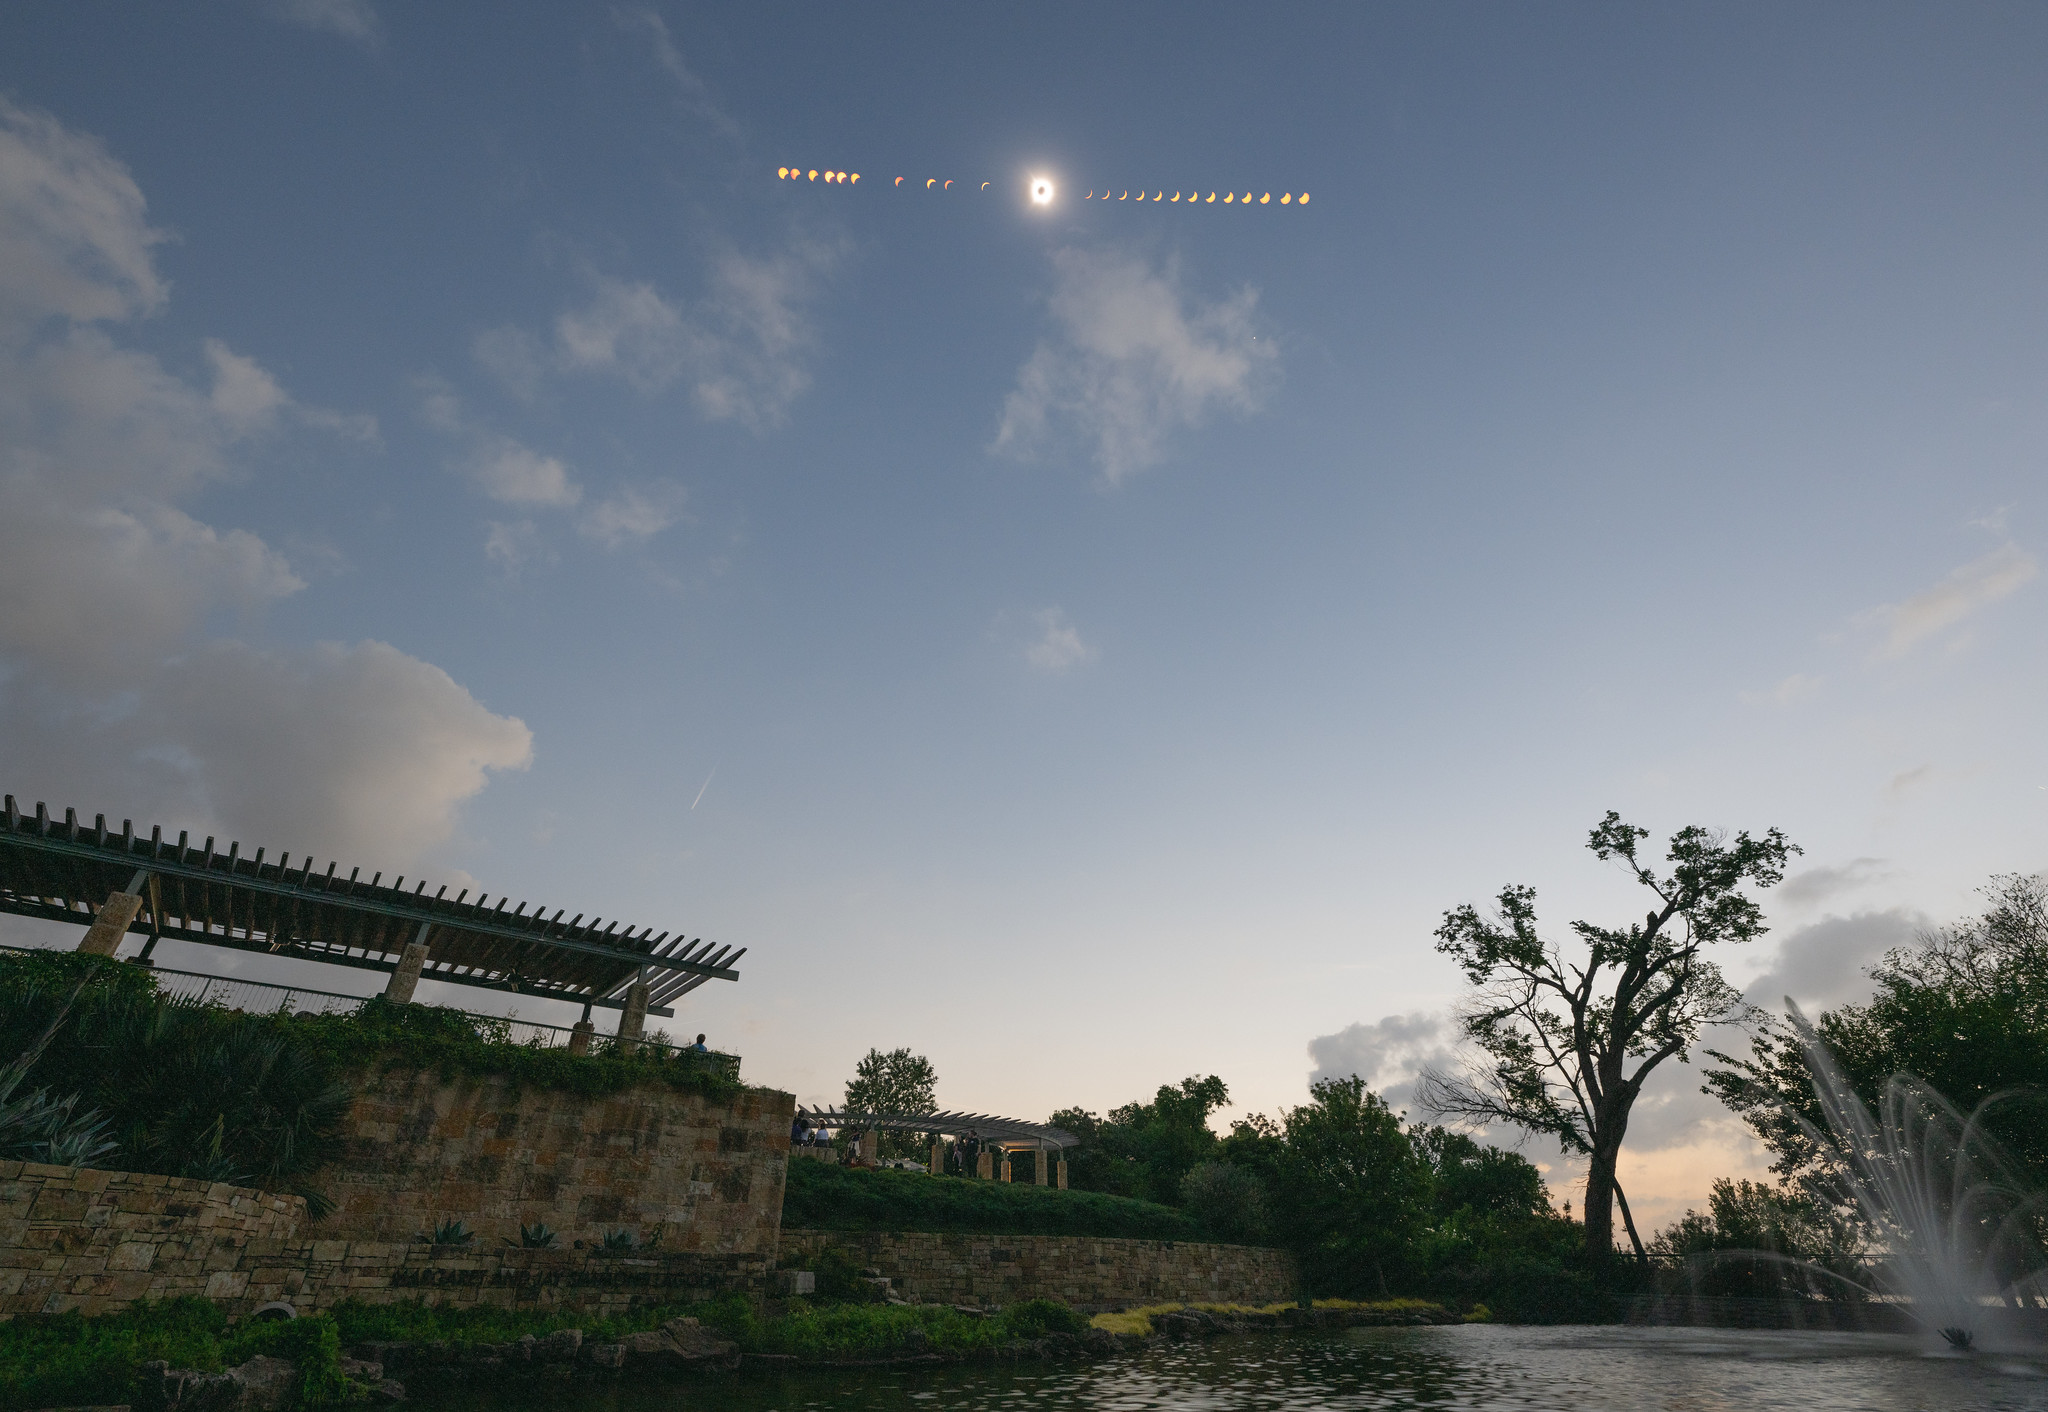 Above a garden, pergola, pond, and fountain, the stages of the eclipse are seen in the sky. From left to right, in a series of 24 images, the Sun changes from partially covered, to a crescent, to a total solar eclipse, then back to a crescent and partially covered again.